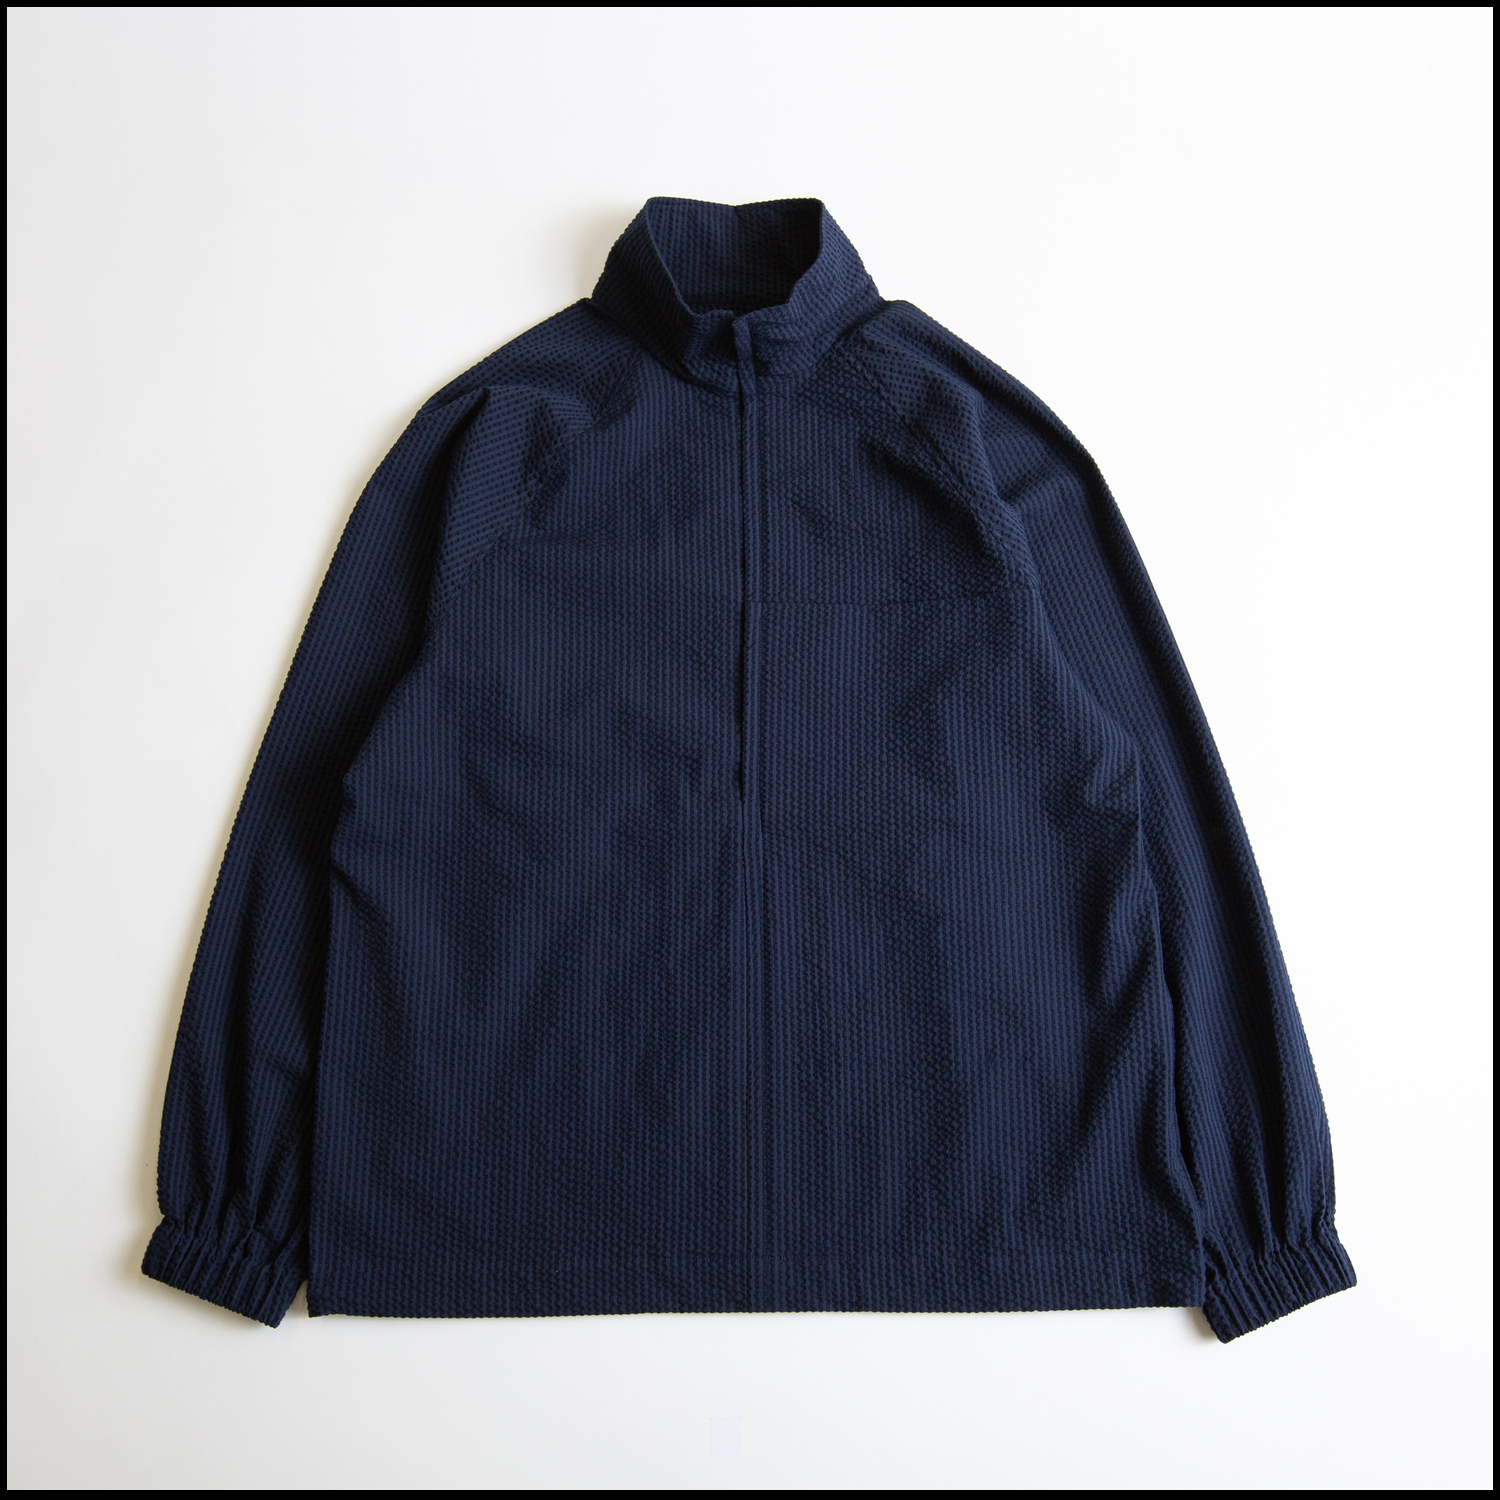 TRACK in Navy color by Arpenteur